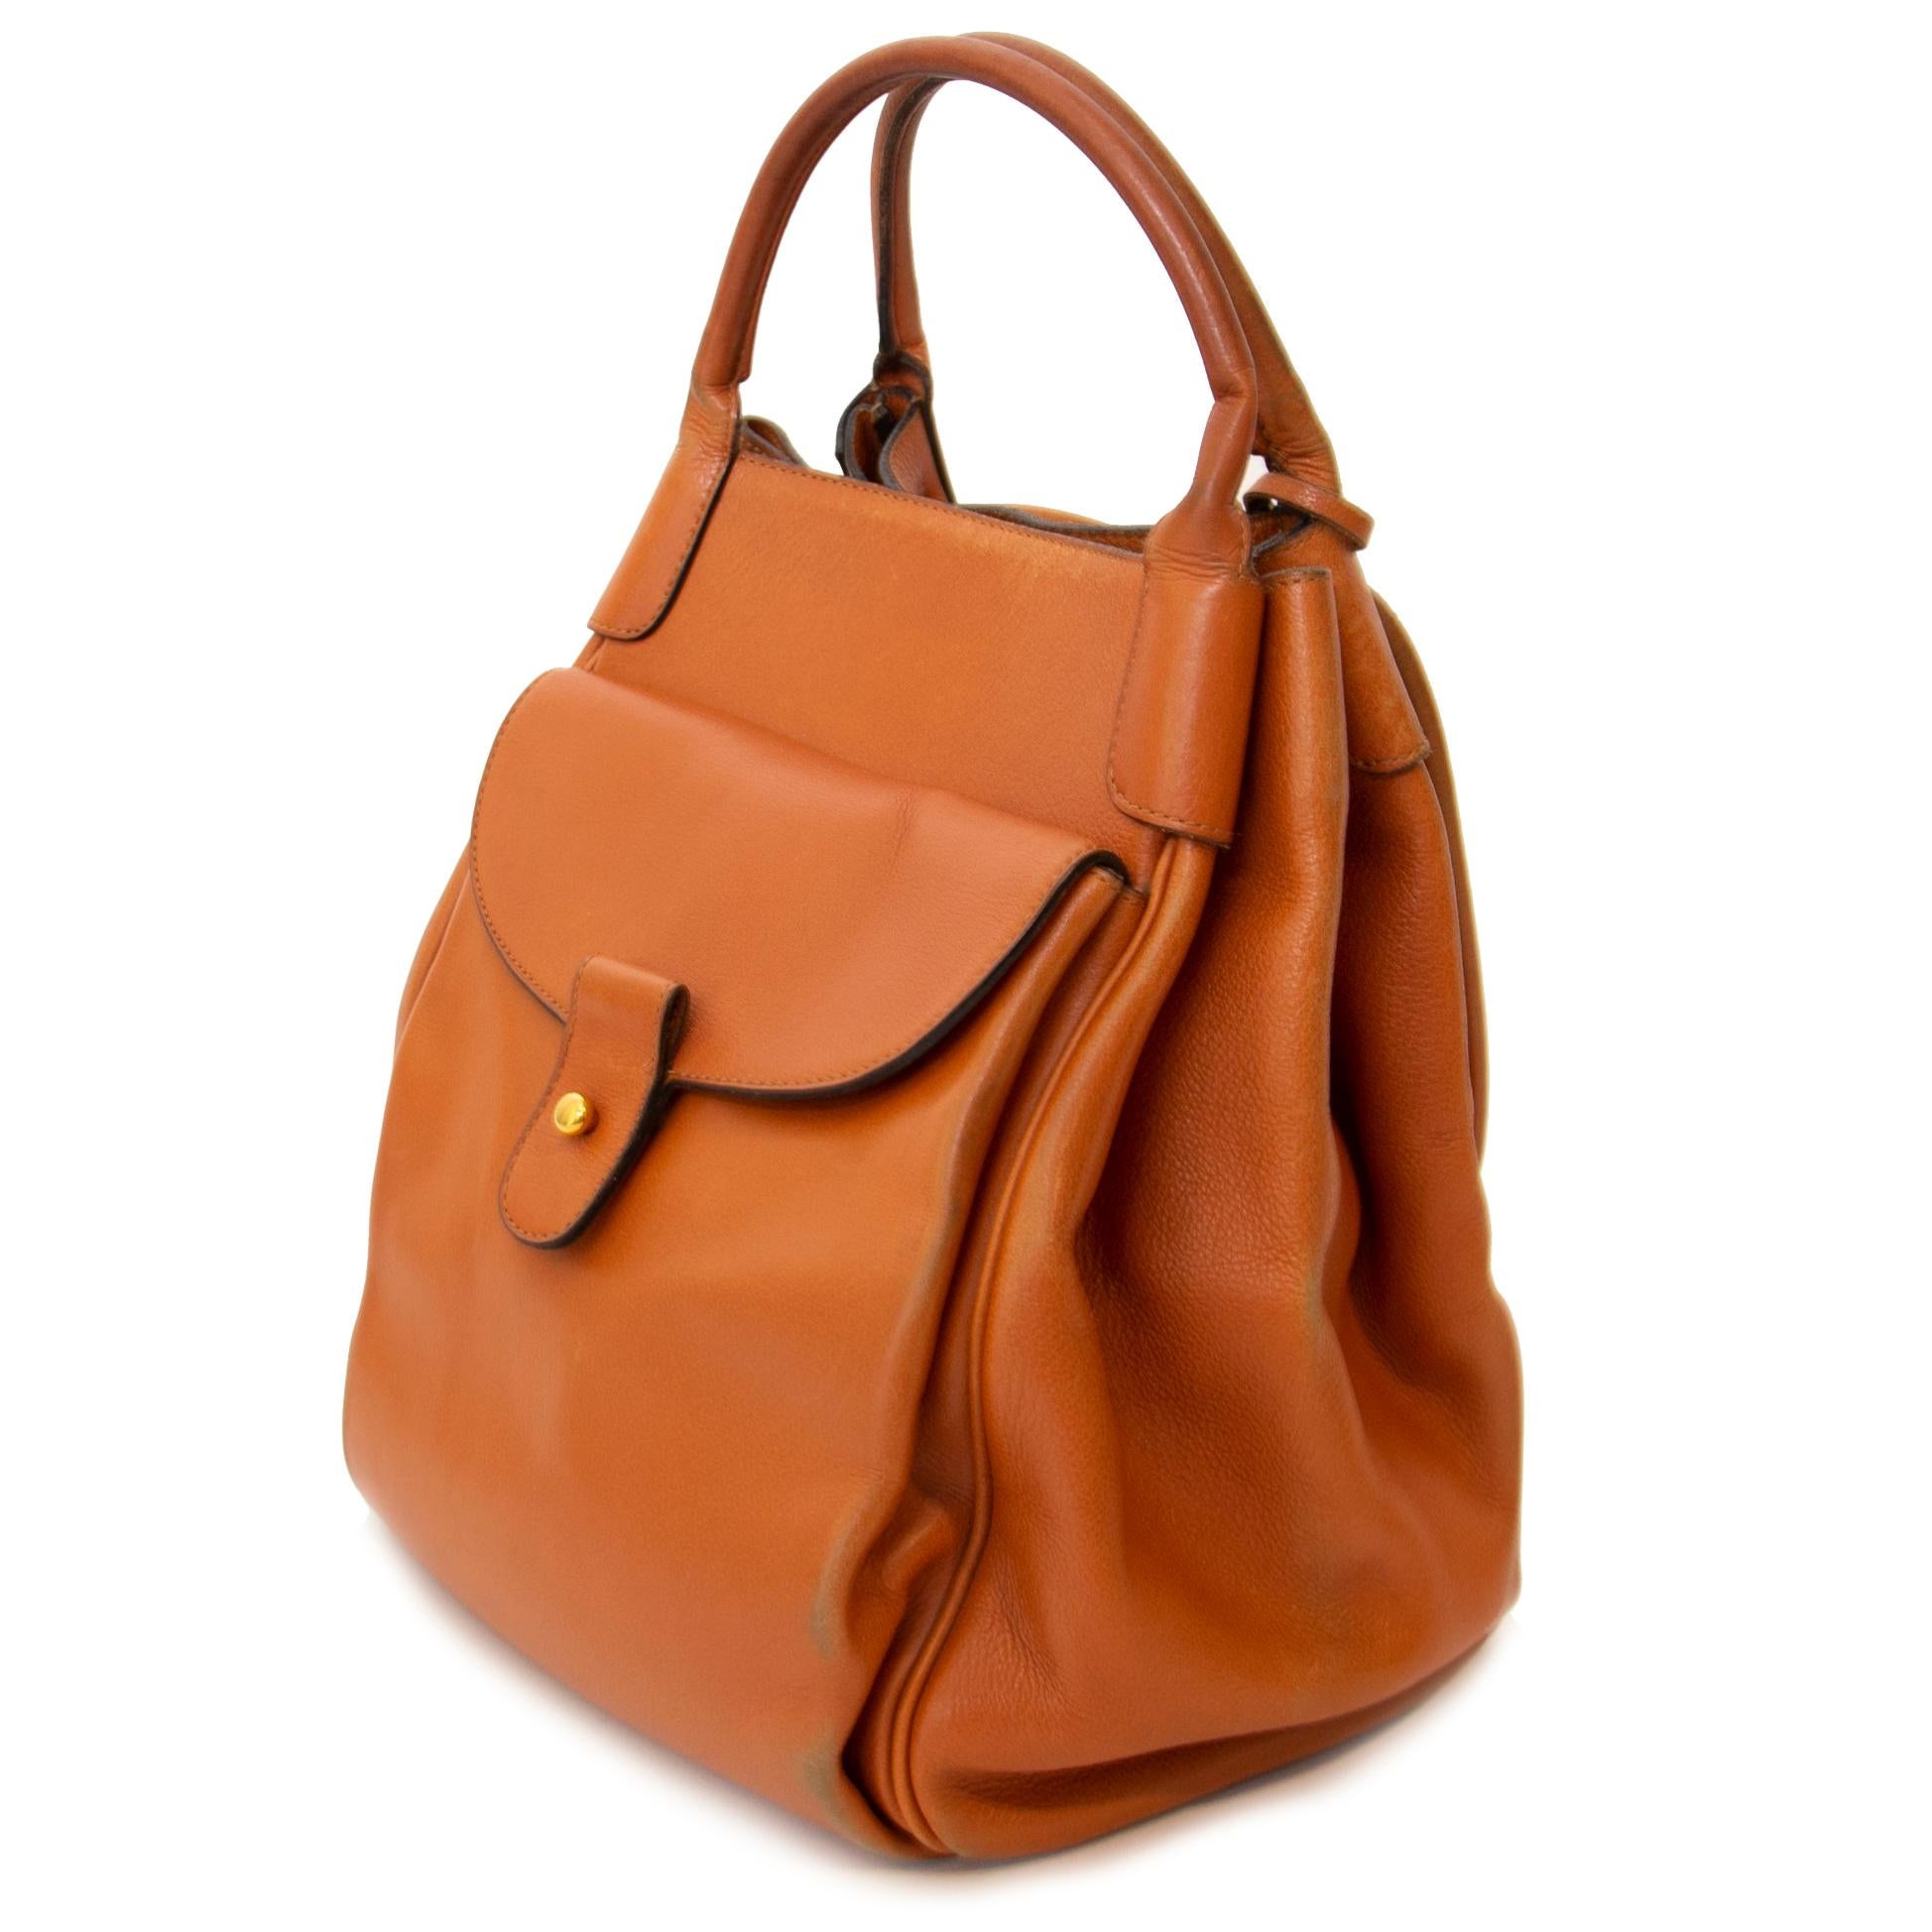 Good preloved condition

Delvaux Corail GM Camel Leather Bag

When convenience meets style. This beautiful Delvaux bag is made in camel leather and features golden toned hardware. You can describe it as 'bucket style' and it comes with a drawstring